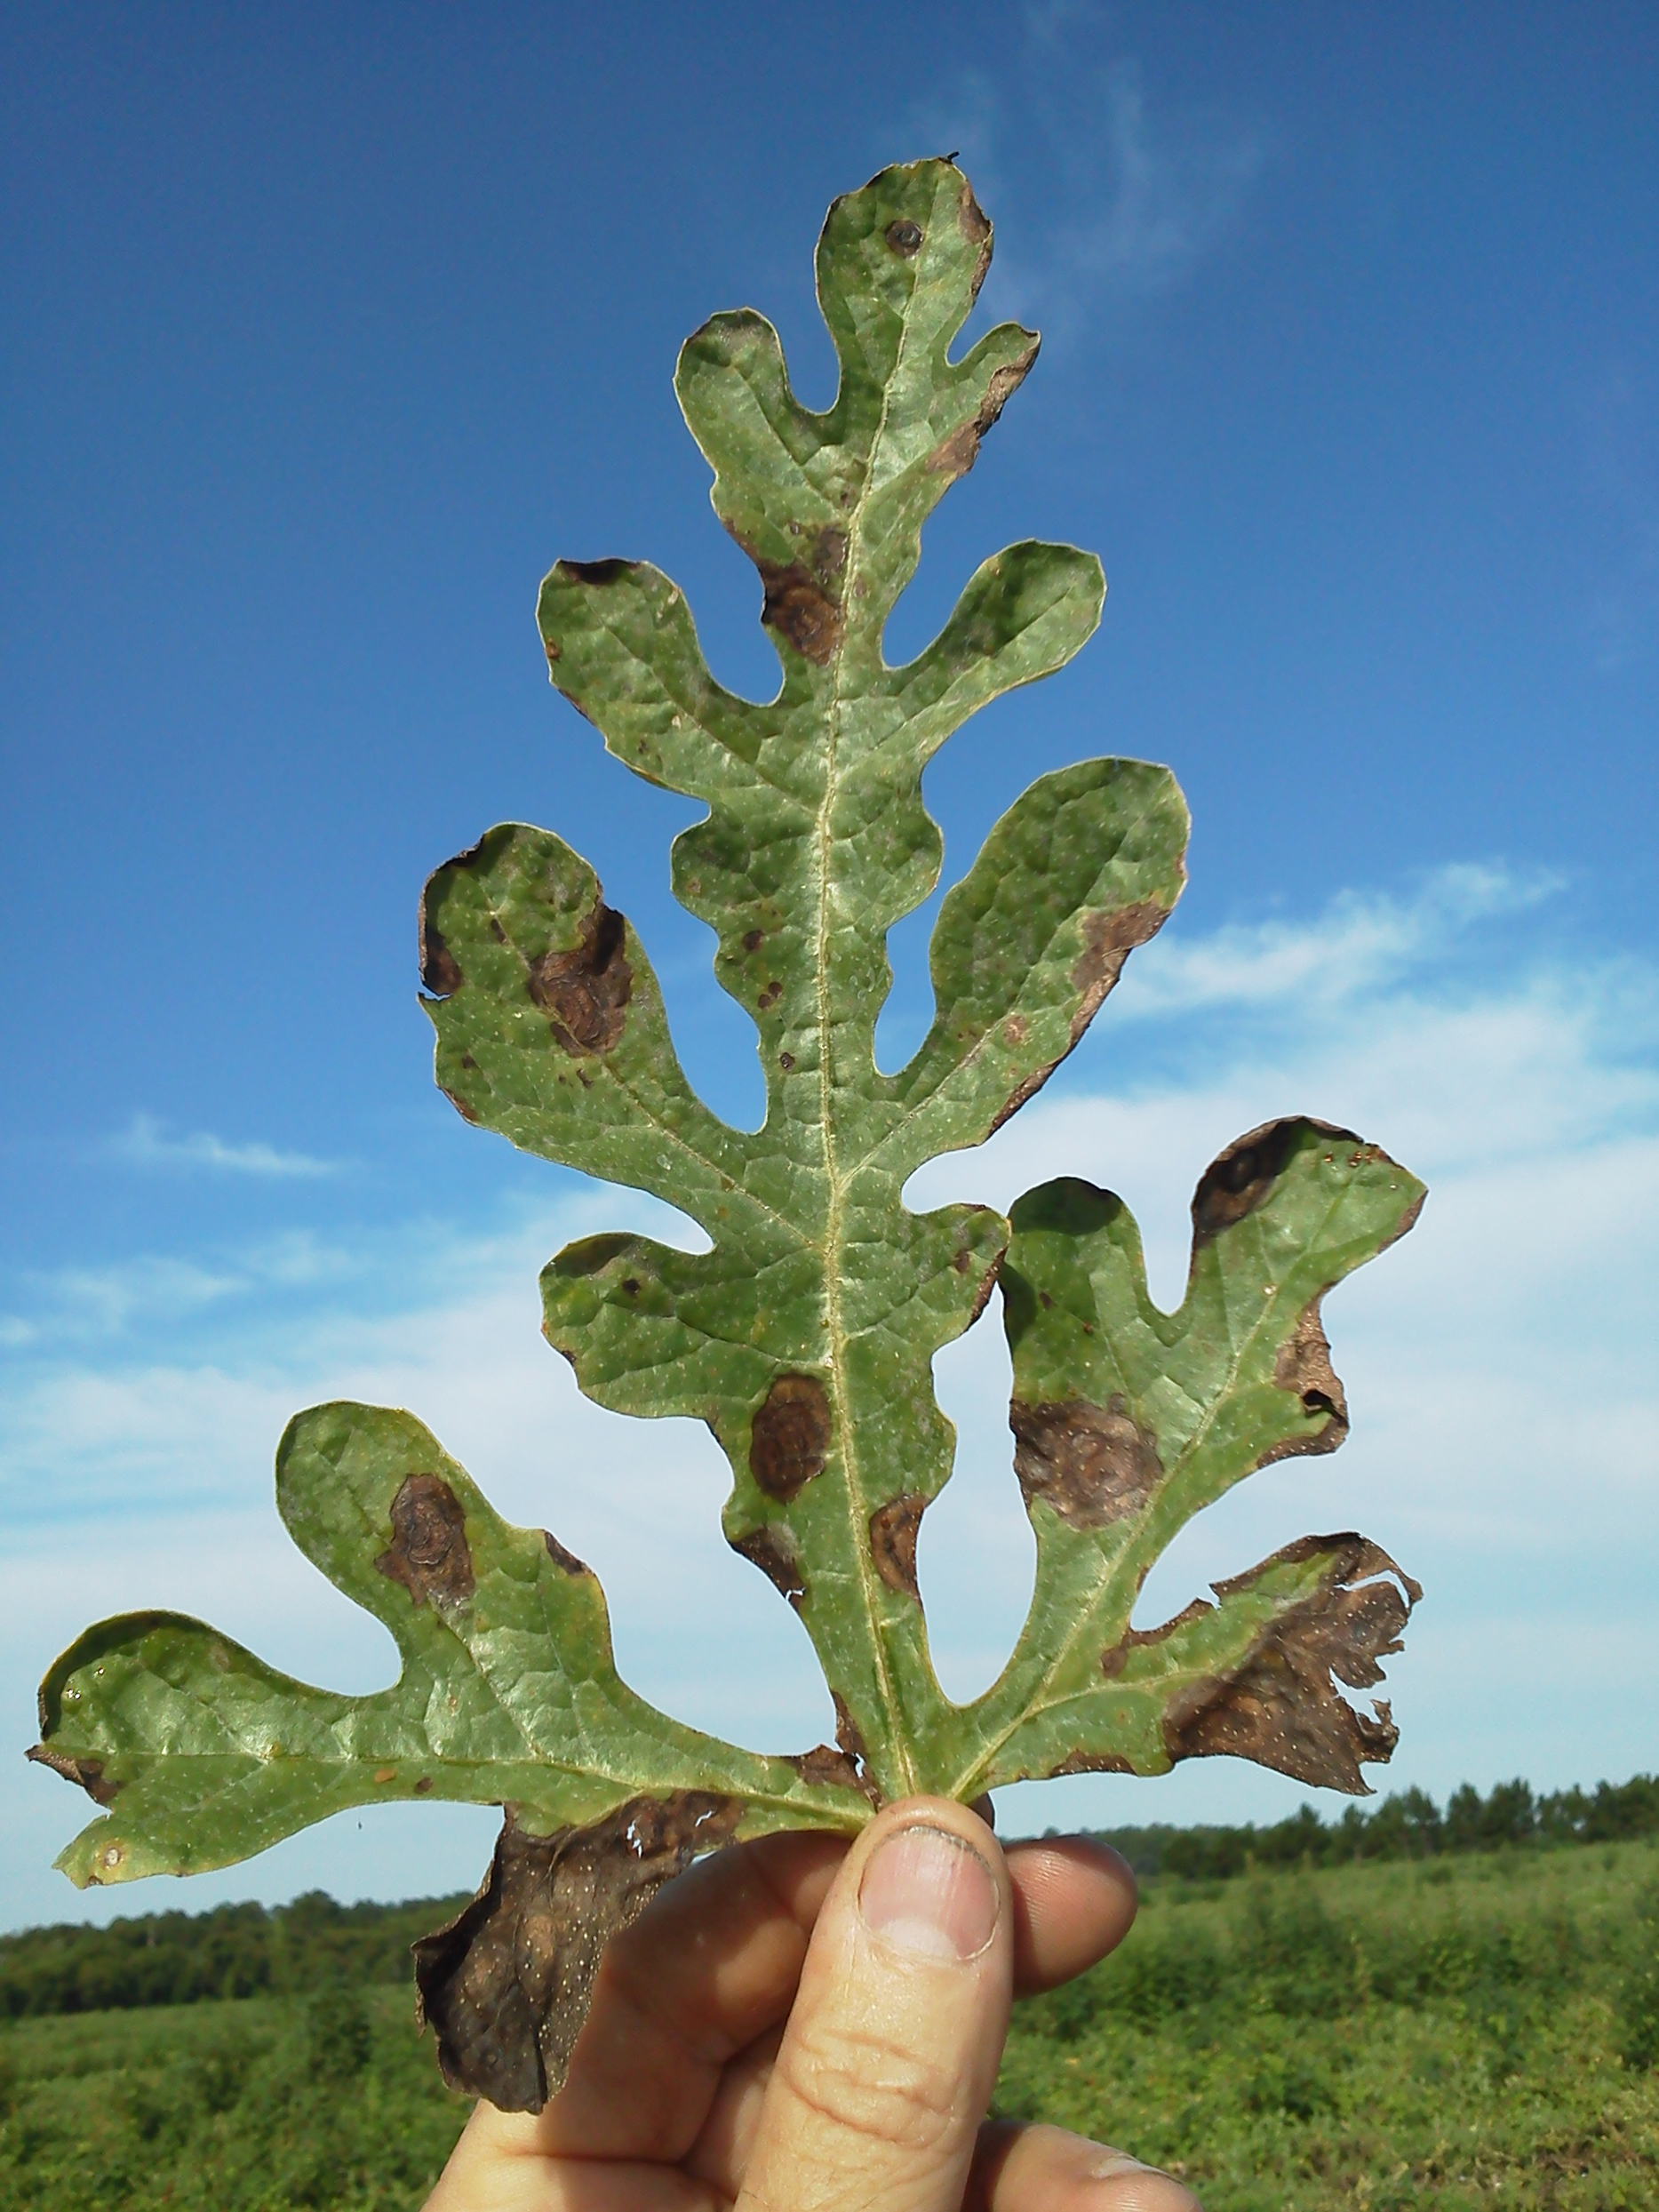 Featured image for “Options Available for Management of Gummy Stem Blight”